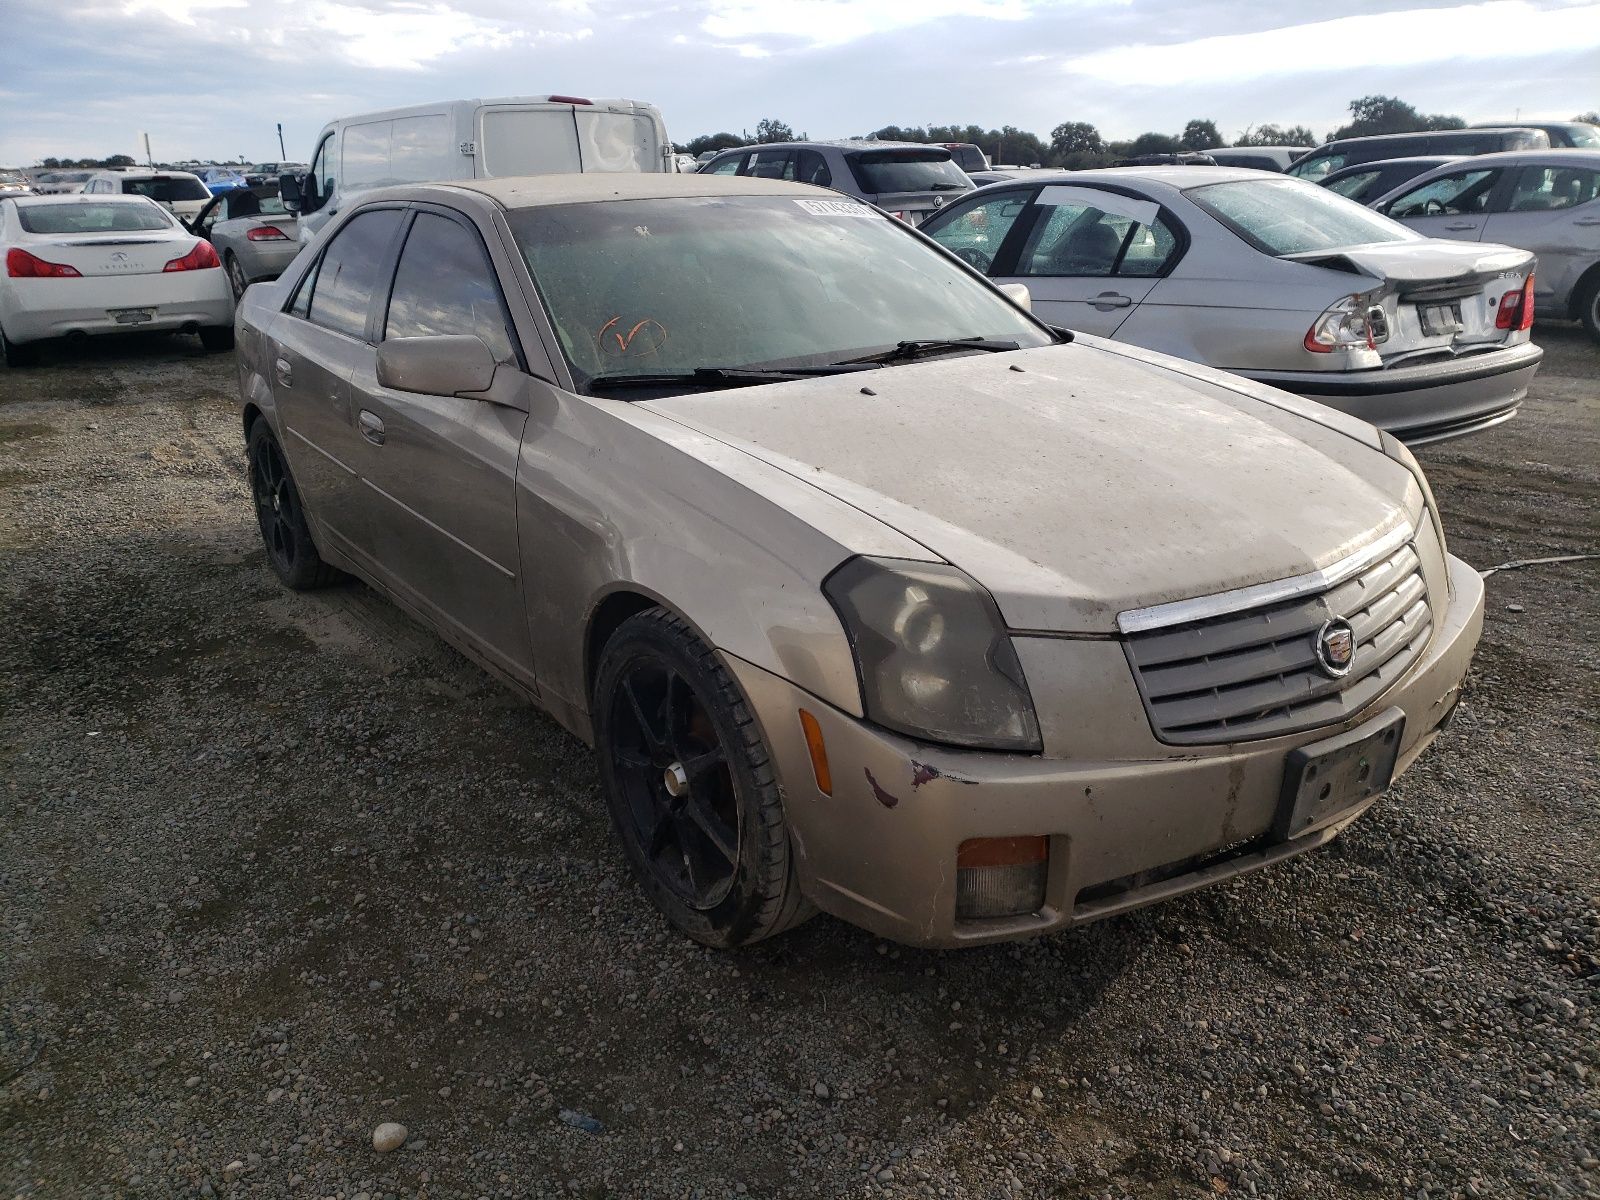 1 of 1G6DM577540119287 Cadillac CTS 2004